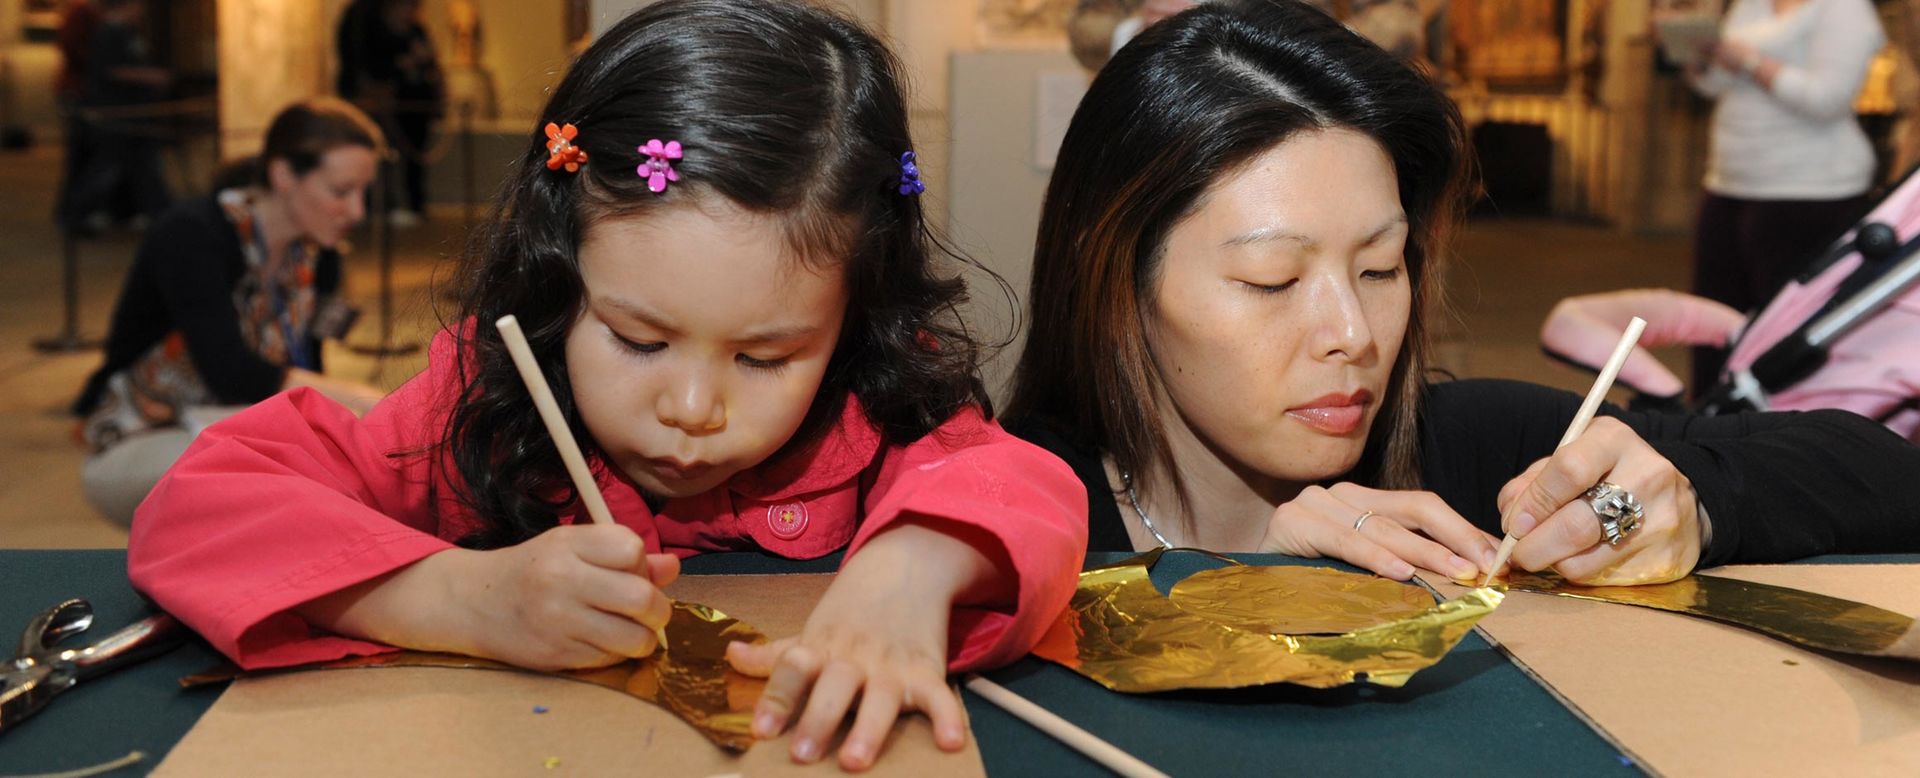 A young girl in a pink shirt and her mother are creating a craft out of gold foil in the middle of the Medieval galleries 